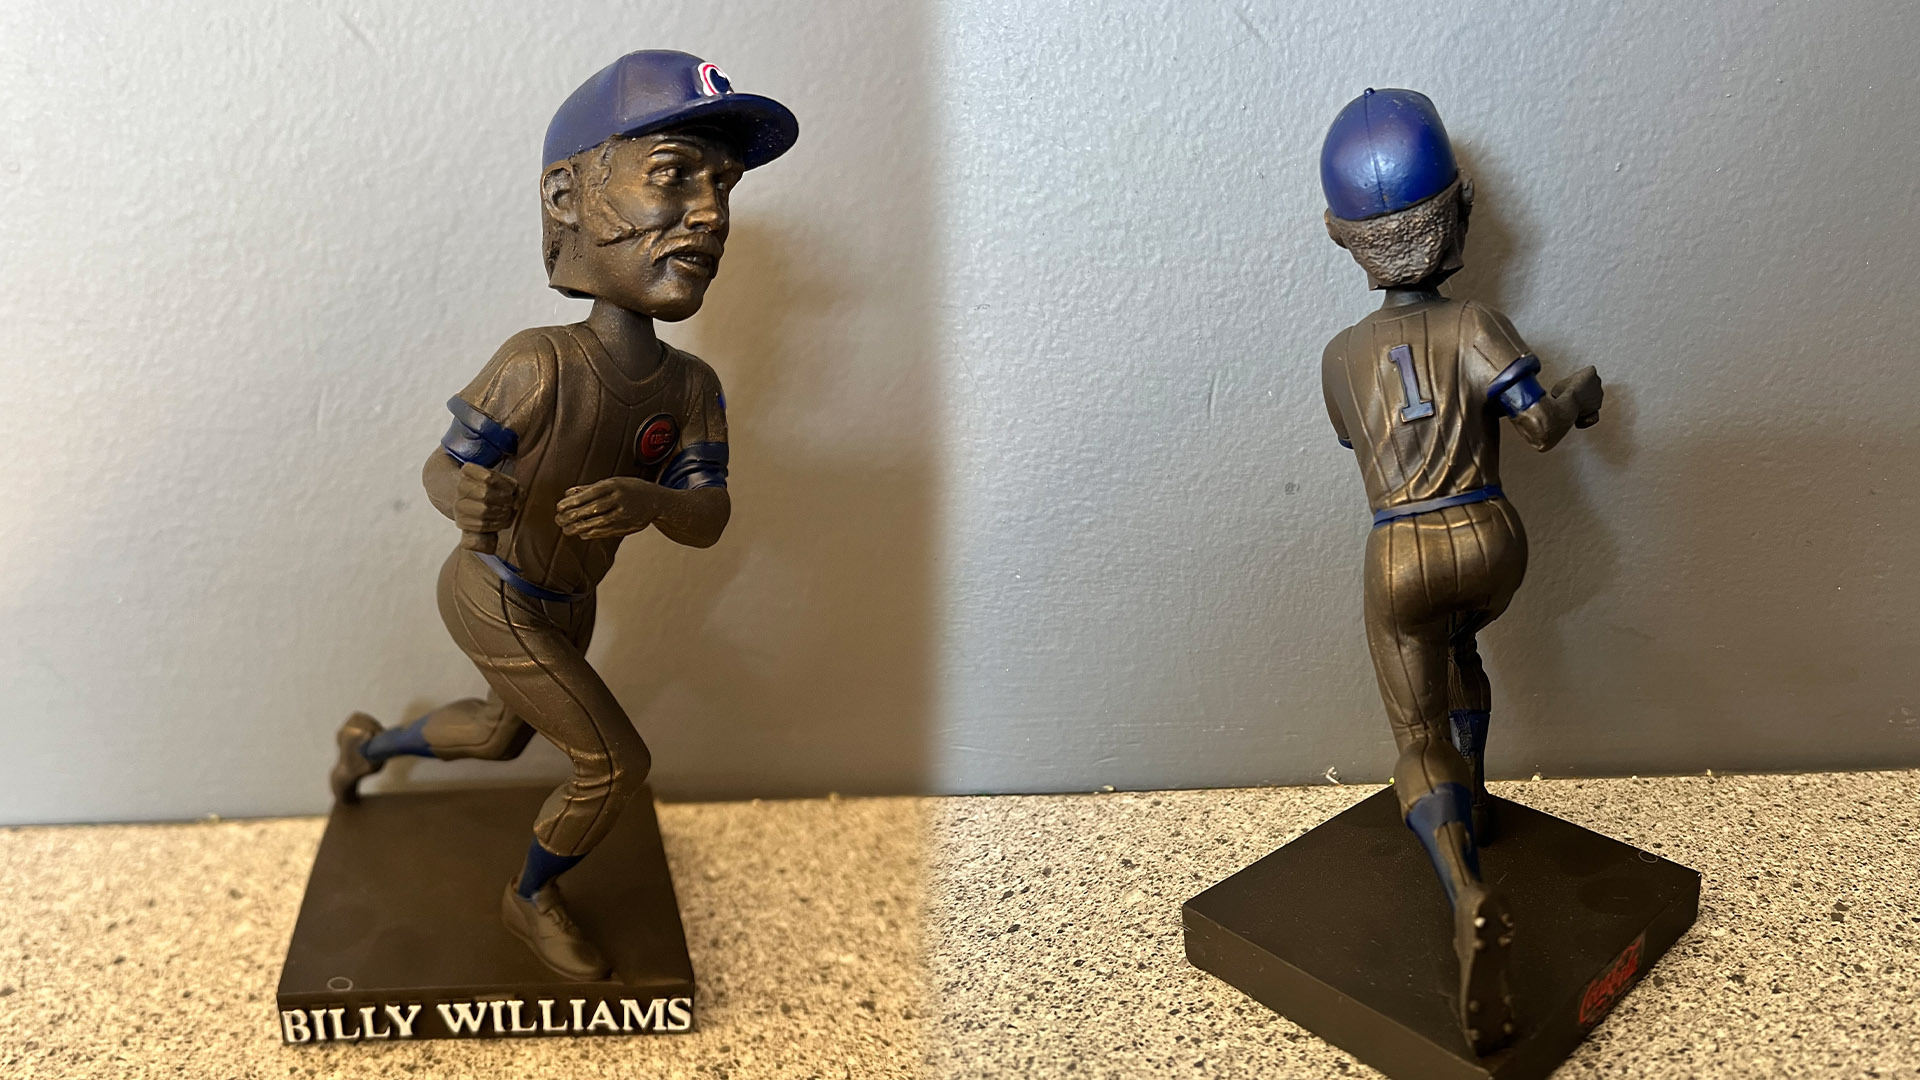 Cubs hand out Billy Williams bobbleheads feature wrong number